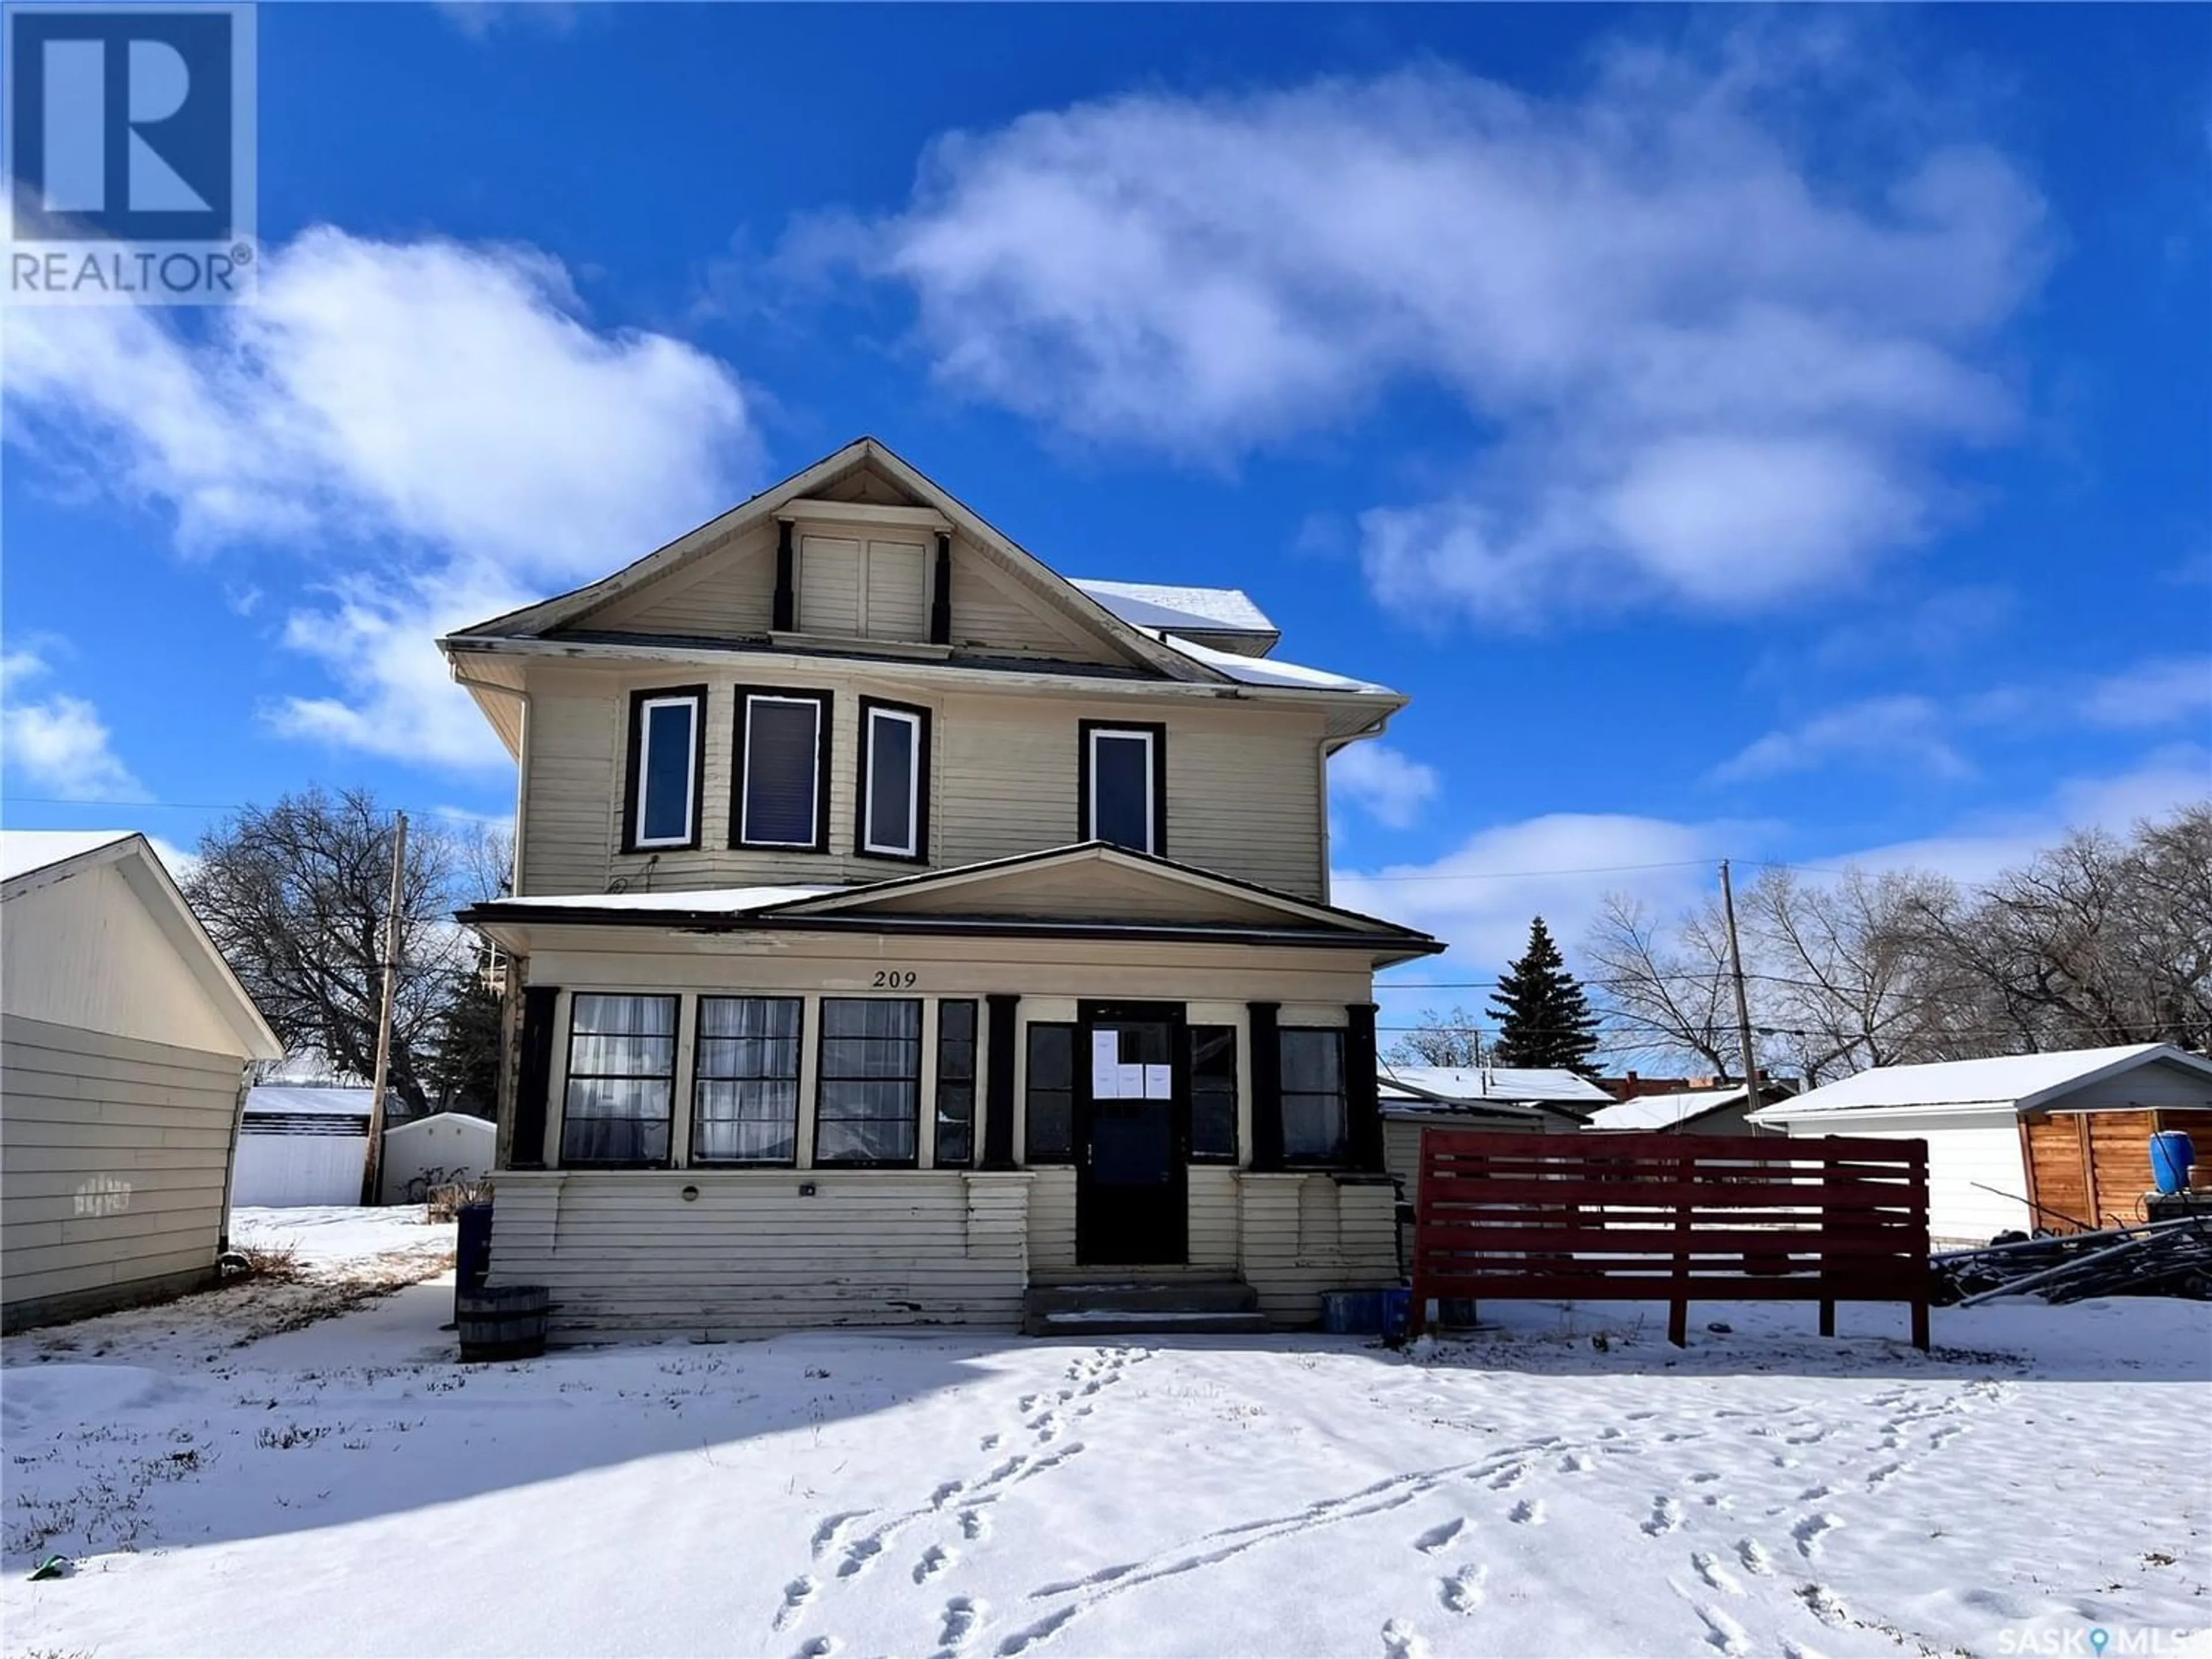 Home with unknown exterior material for 209 2nd STREET E, Wynyard Saskatchewan S0A4T0